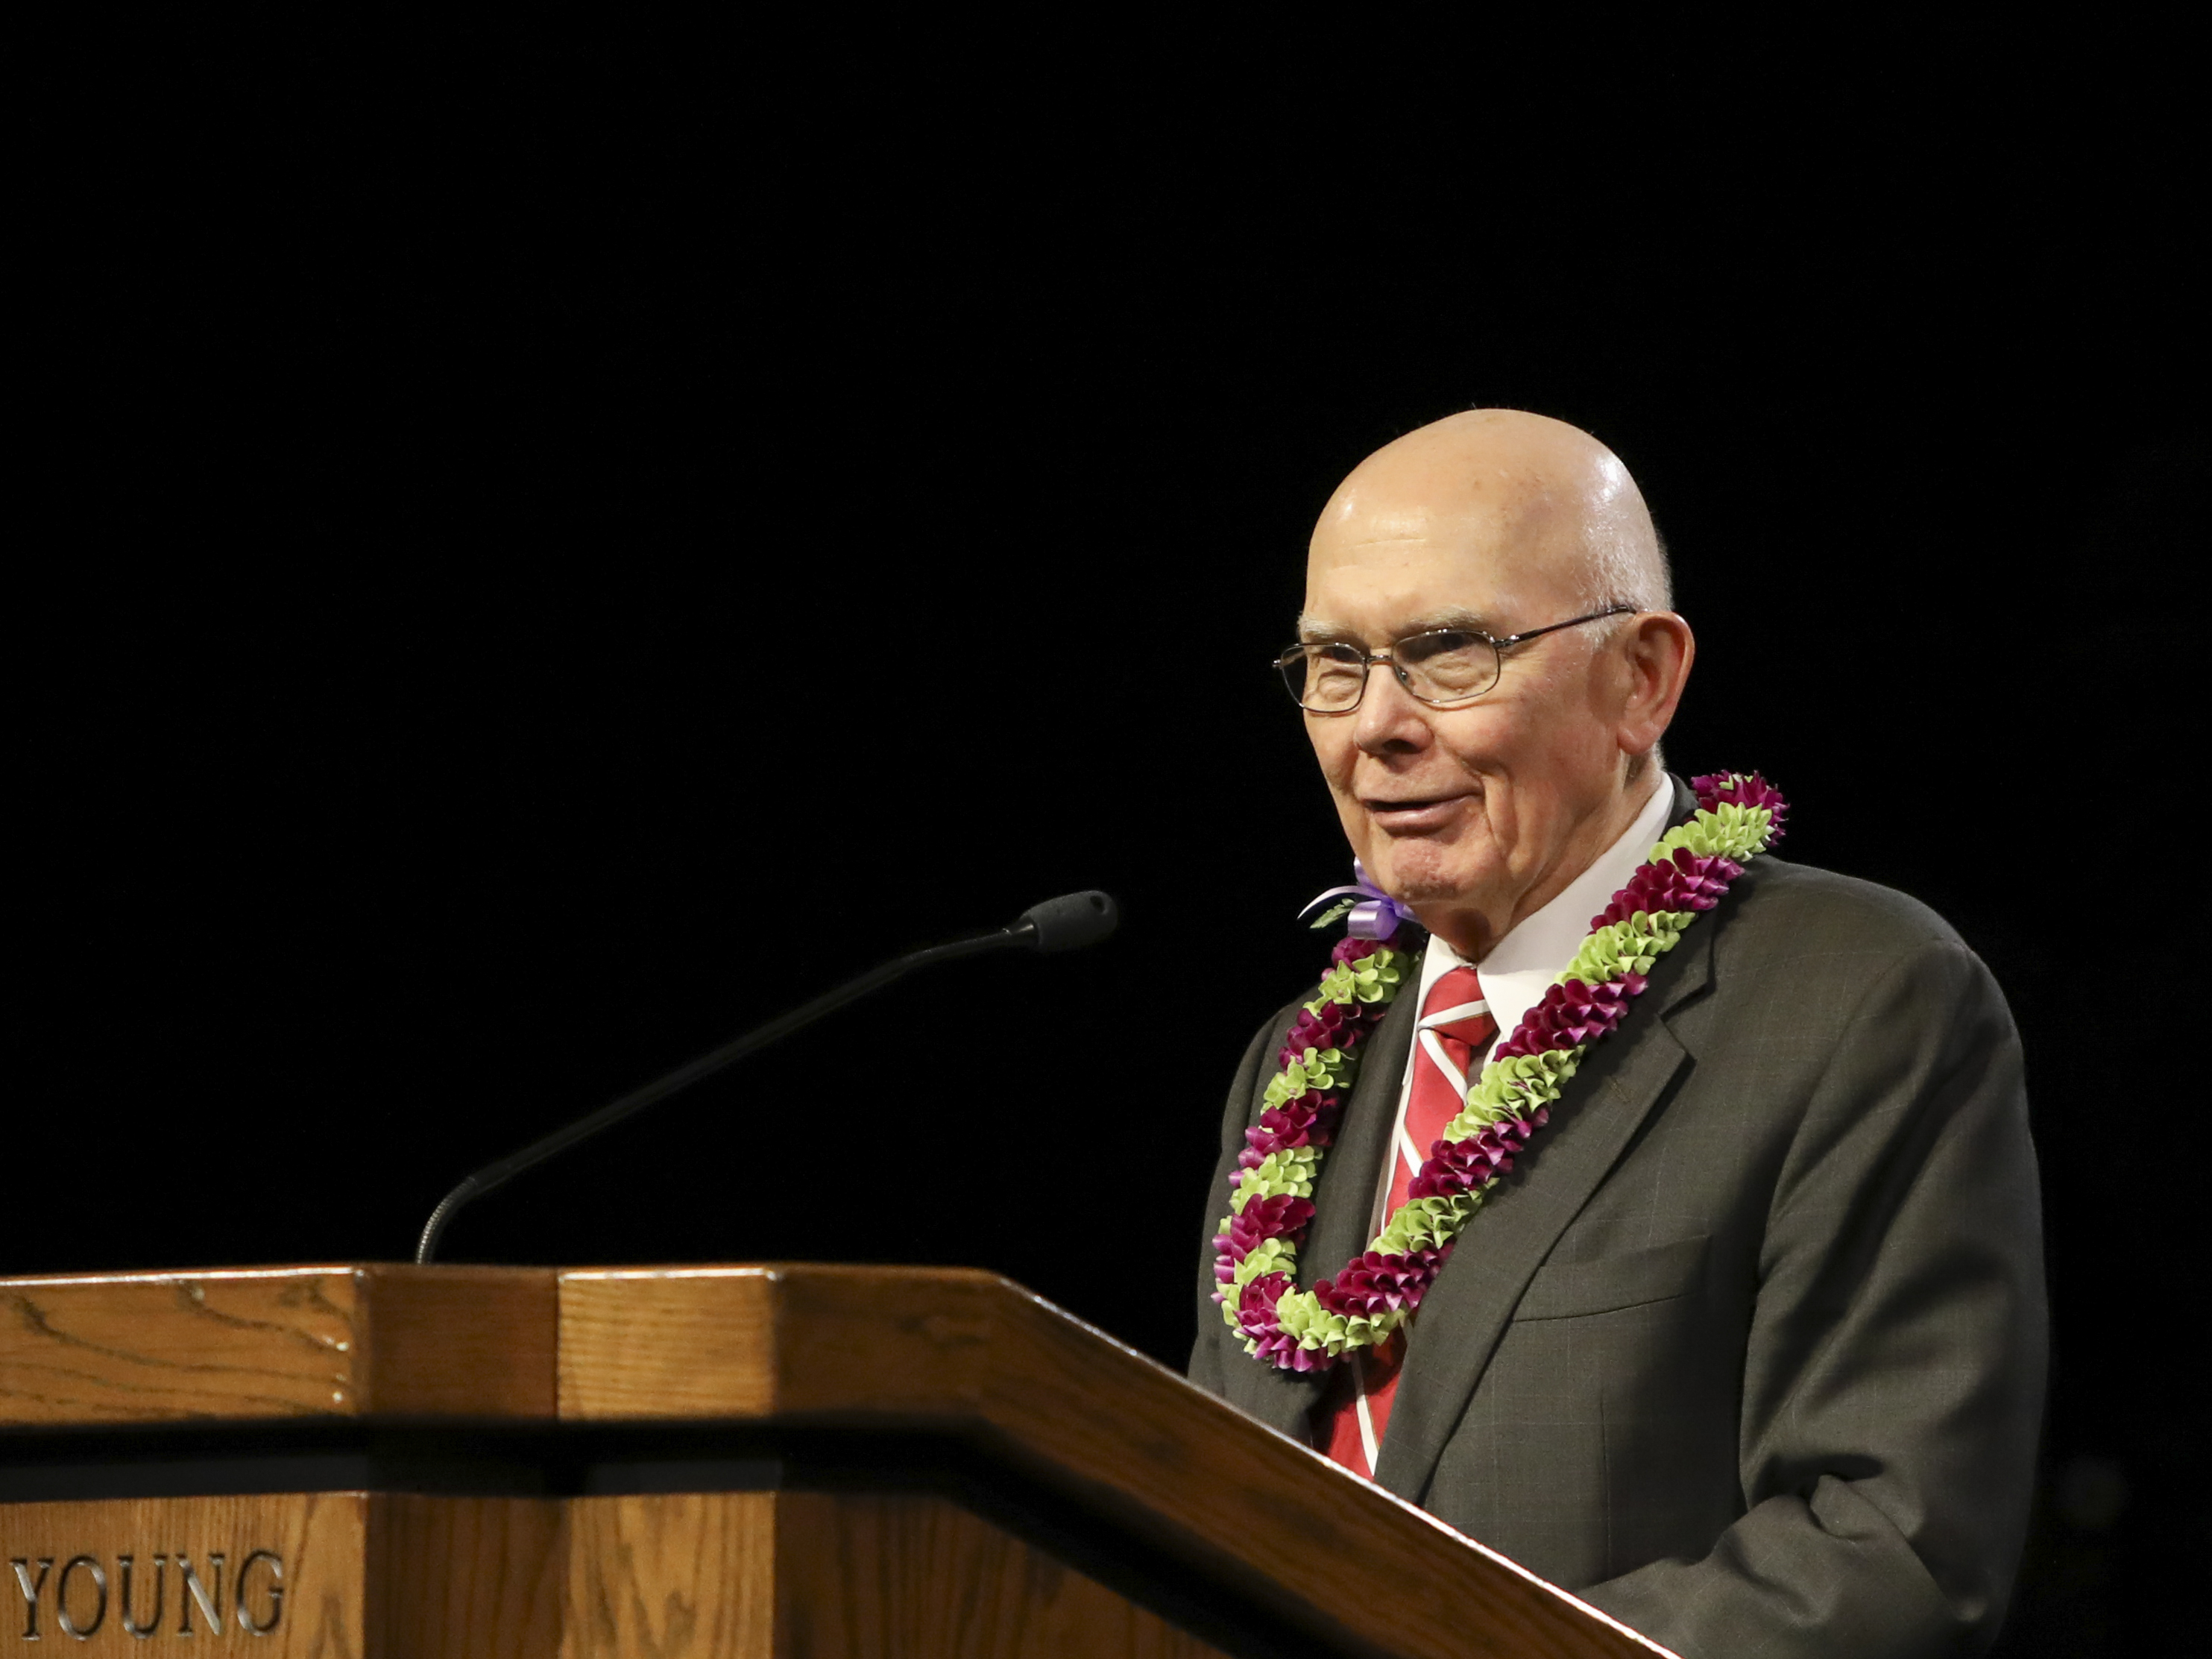 President Oaks speaks on dealing with anxiety, stress, at BYUHawaii